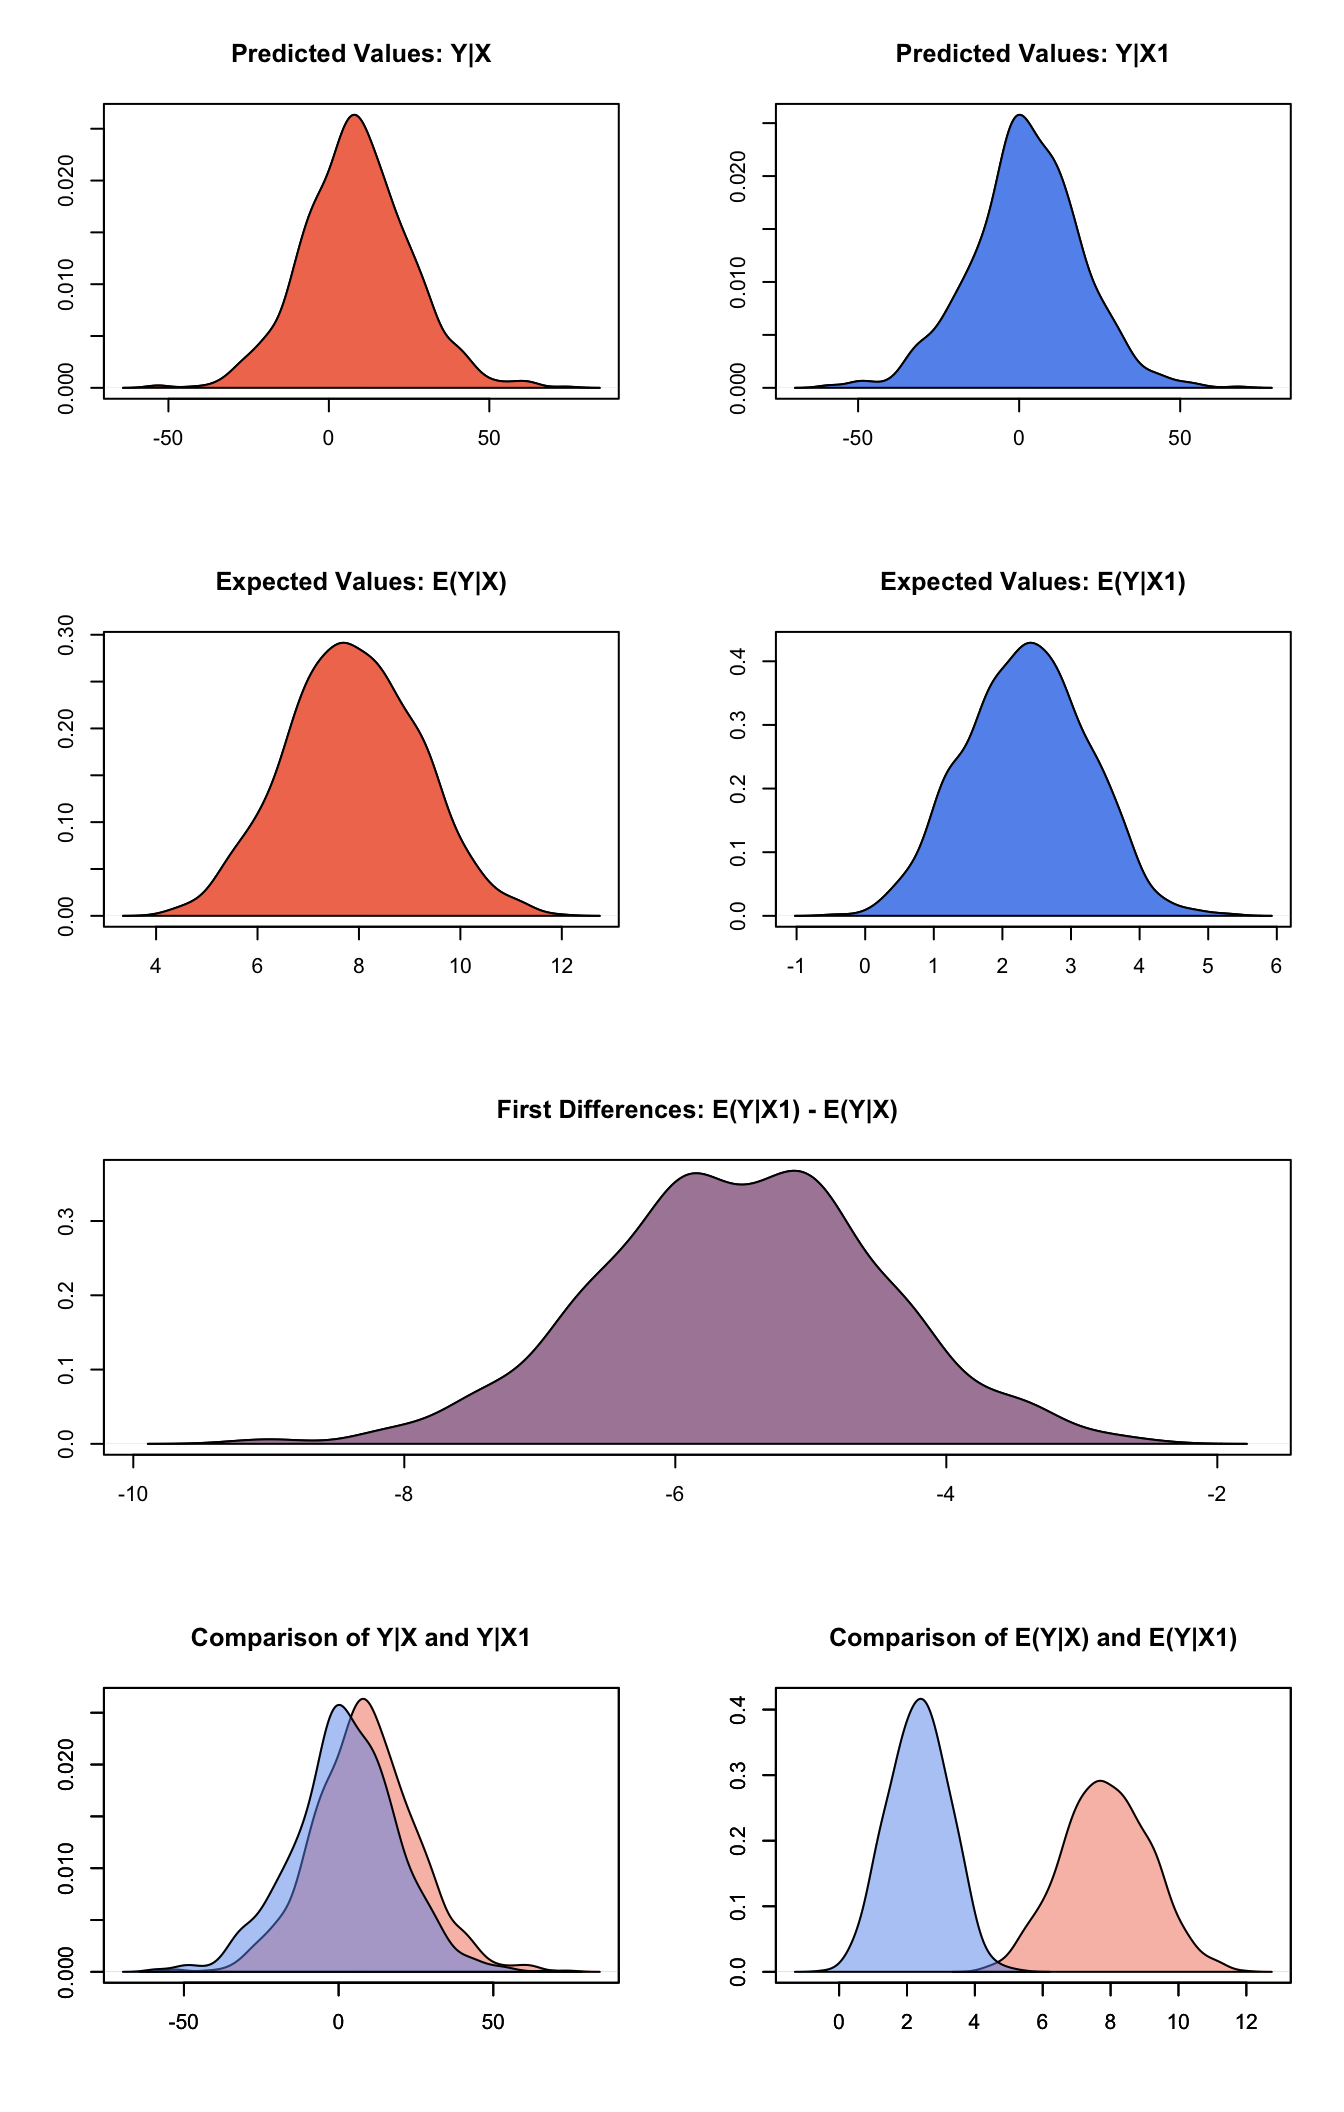 Graphs of Quantities of Interest for Normal GEE Model